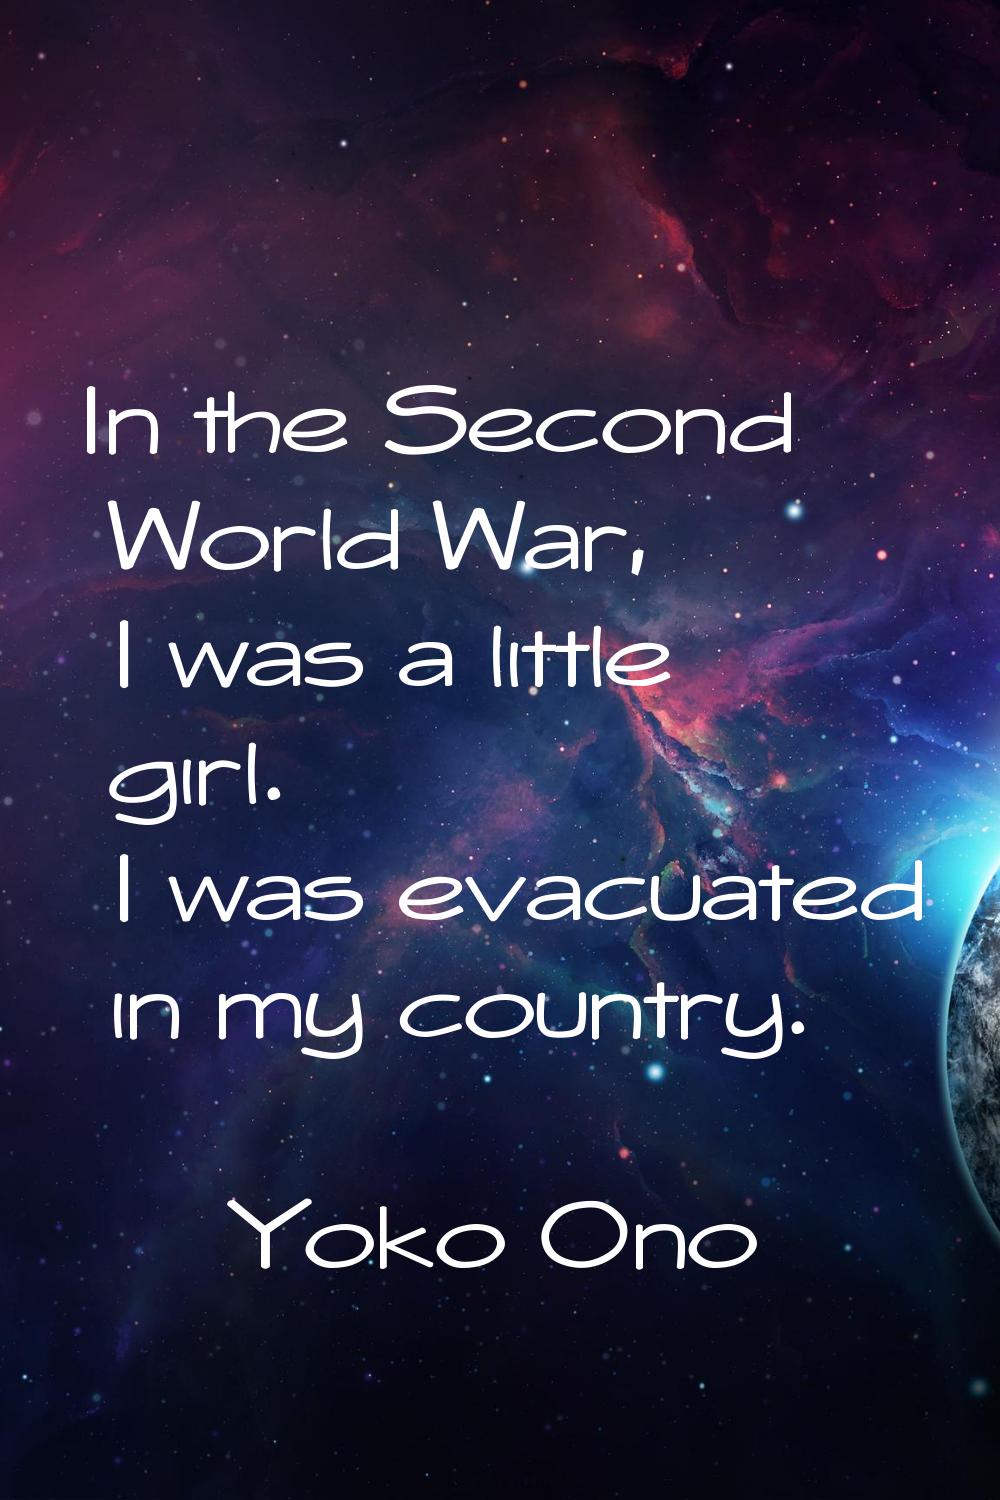 In the Second World War, I was a little girl. I was evacuated in my country.